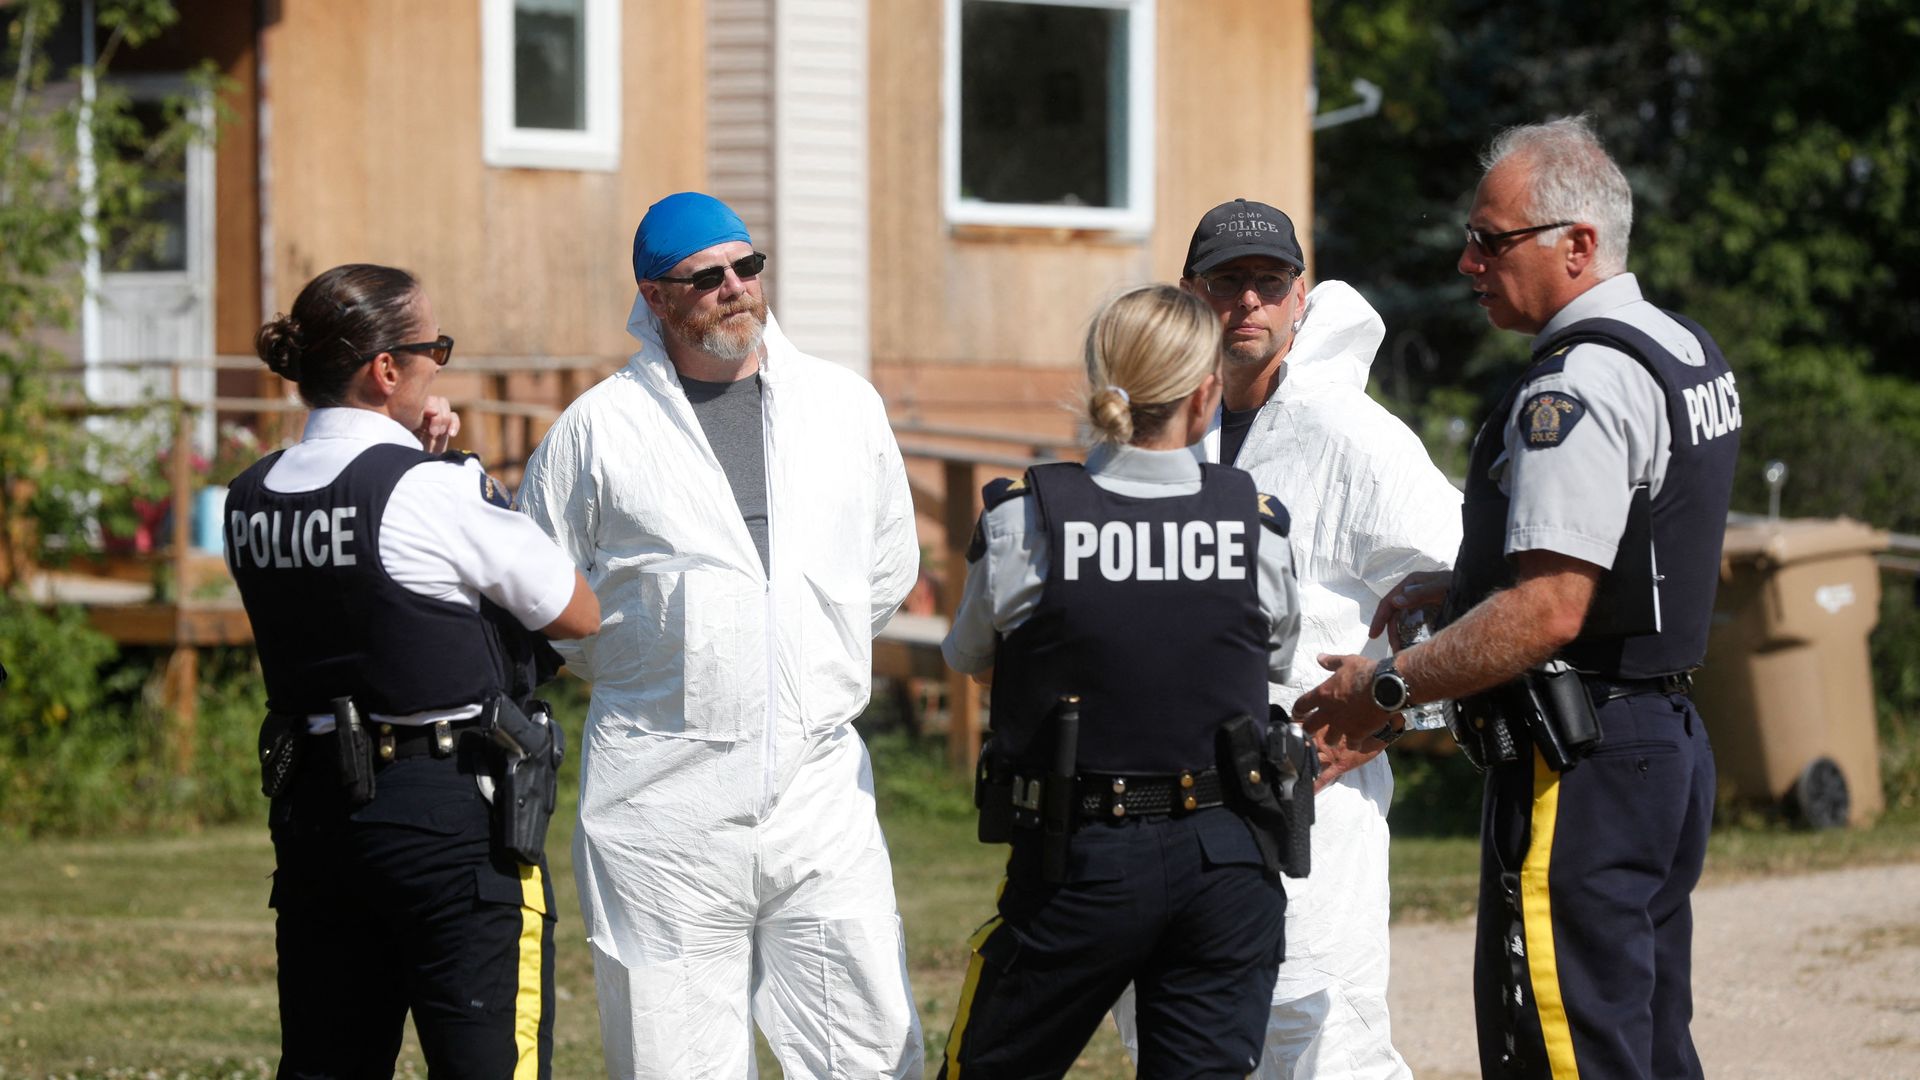 Royal Canadian Mounted Police forensics officers speak outside the crime scene where stabbing victim Wes Petterson was found, in Weldon, Saskatchewan, Canada, on September 7.